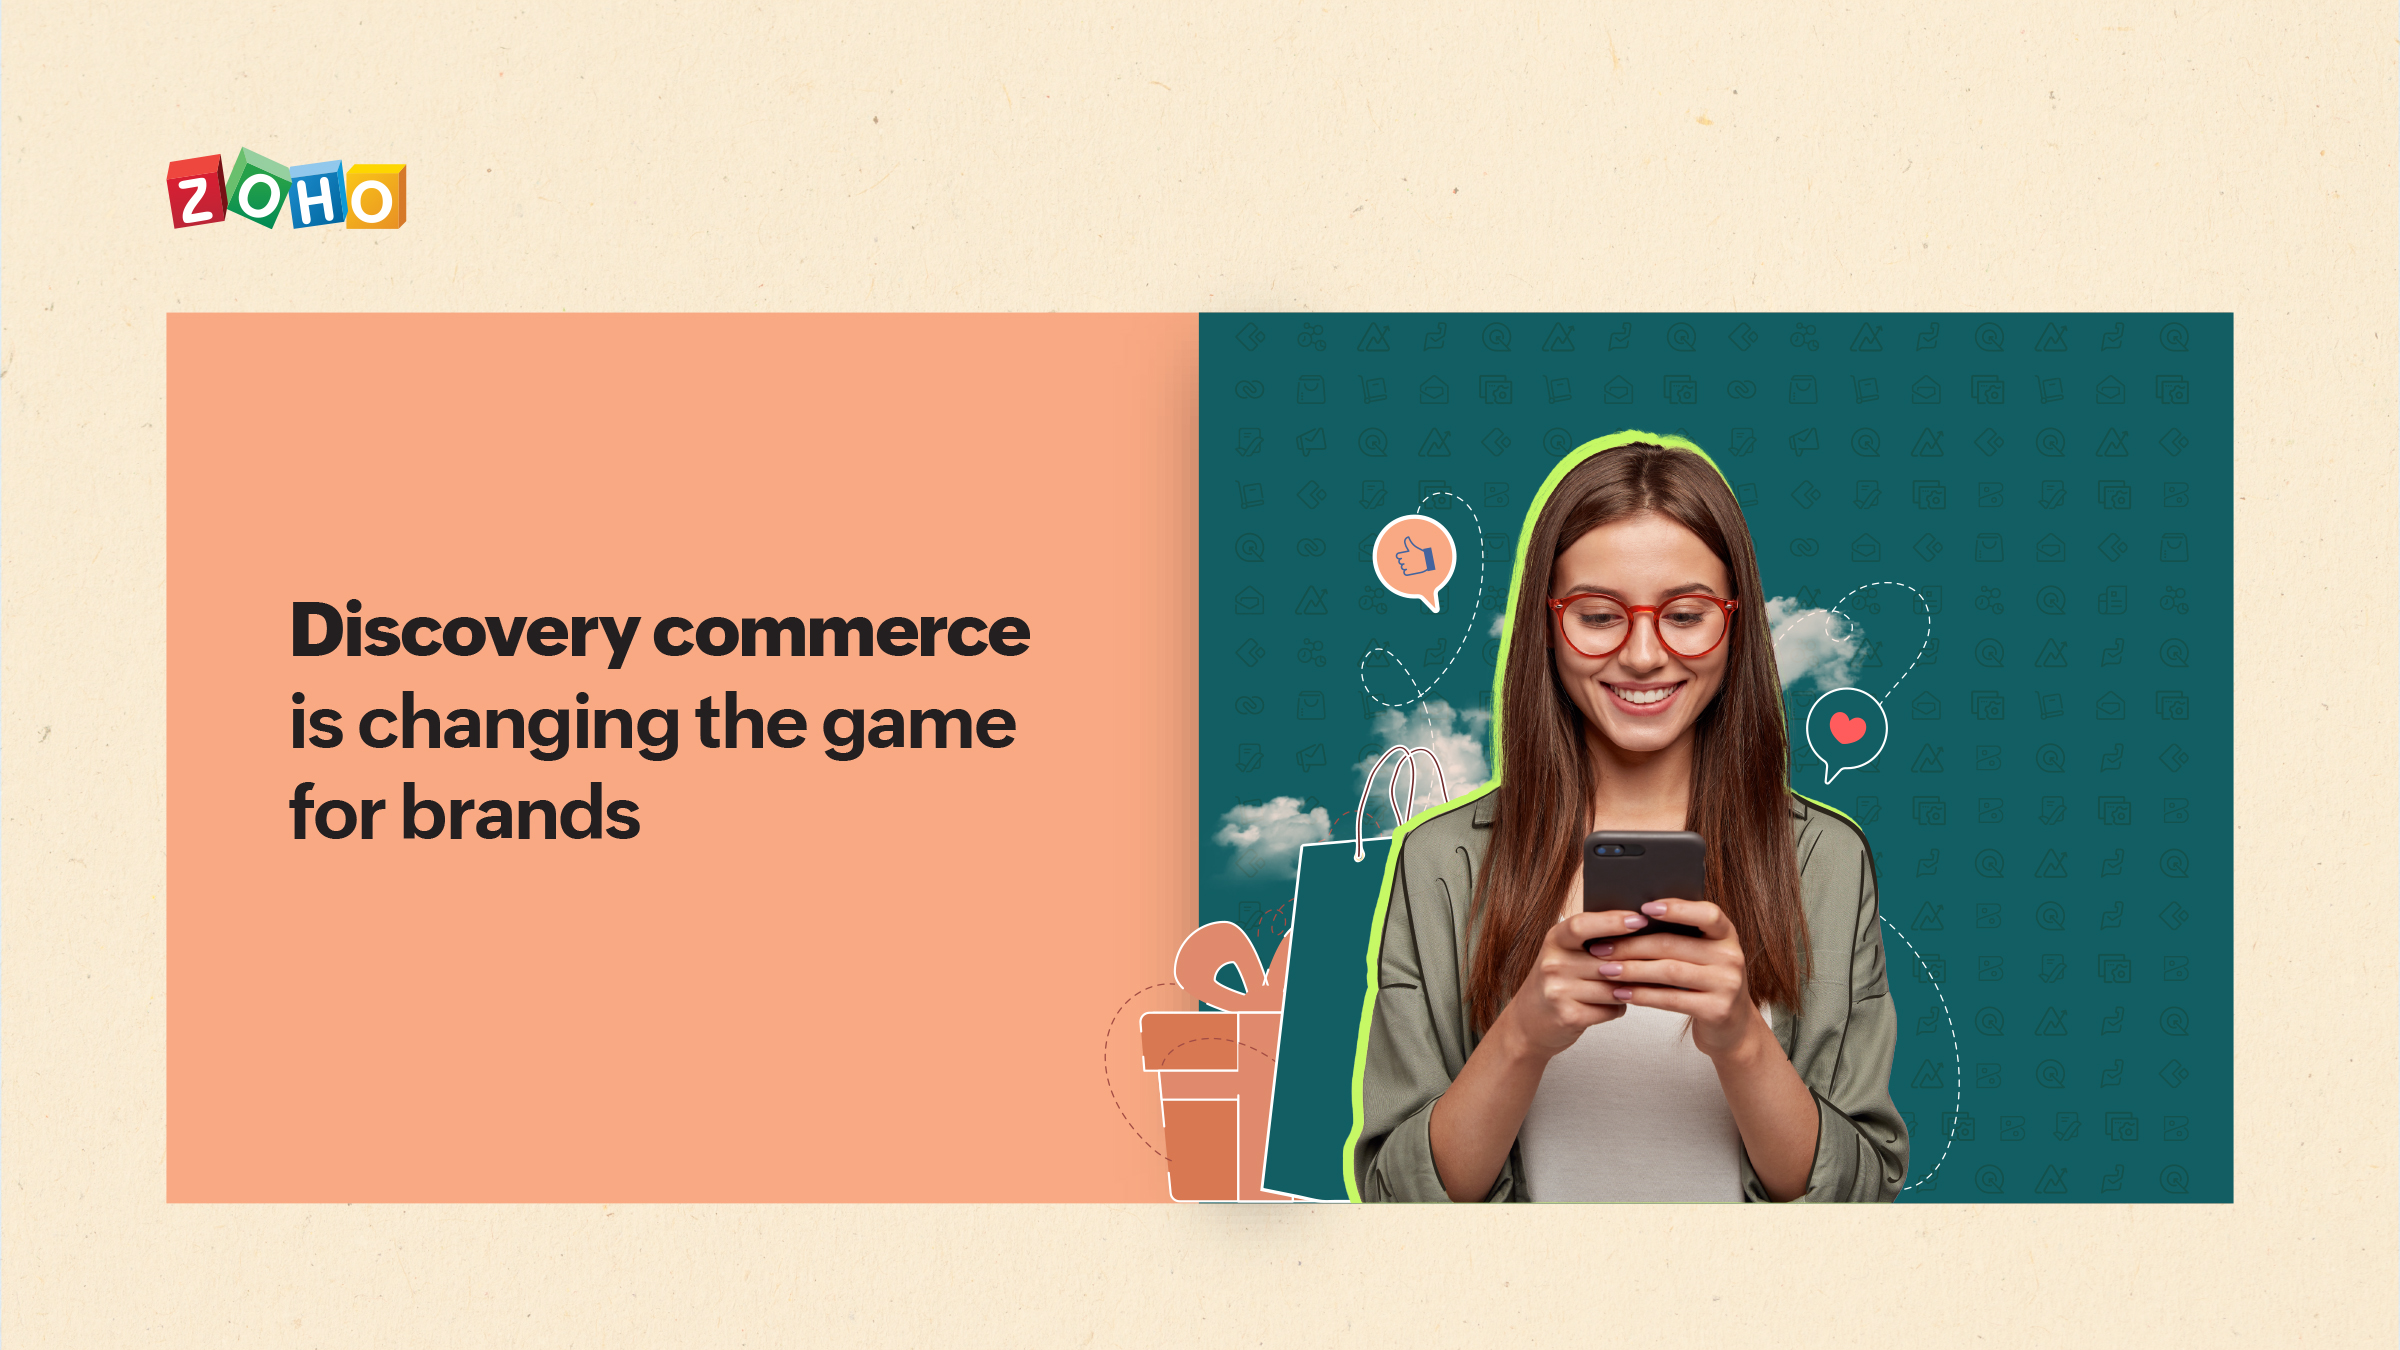 Discovery commerce is changing the game for brands